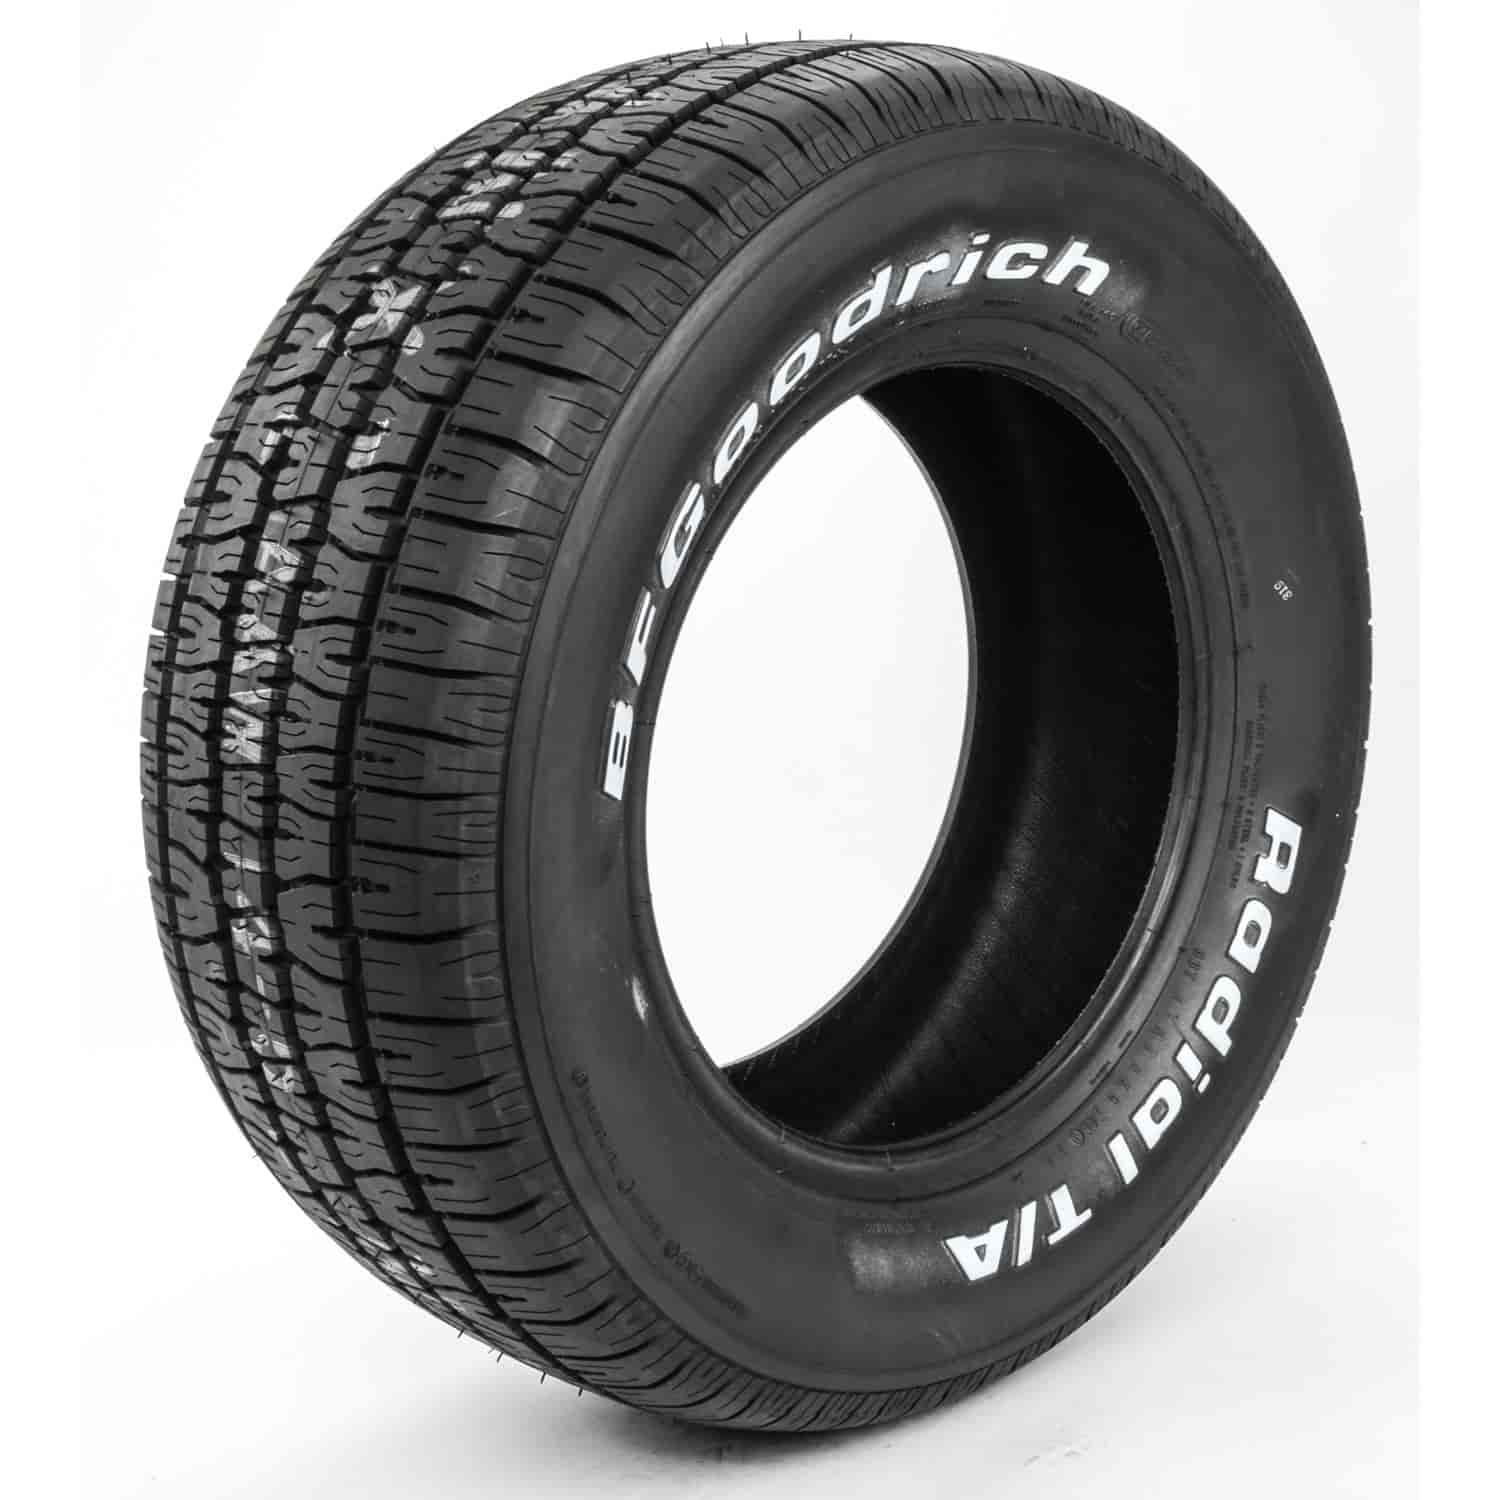 Radial T/A Tire P245/60SR15